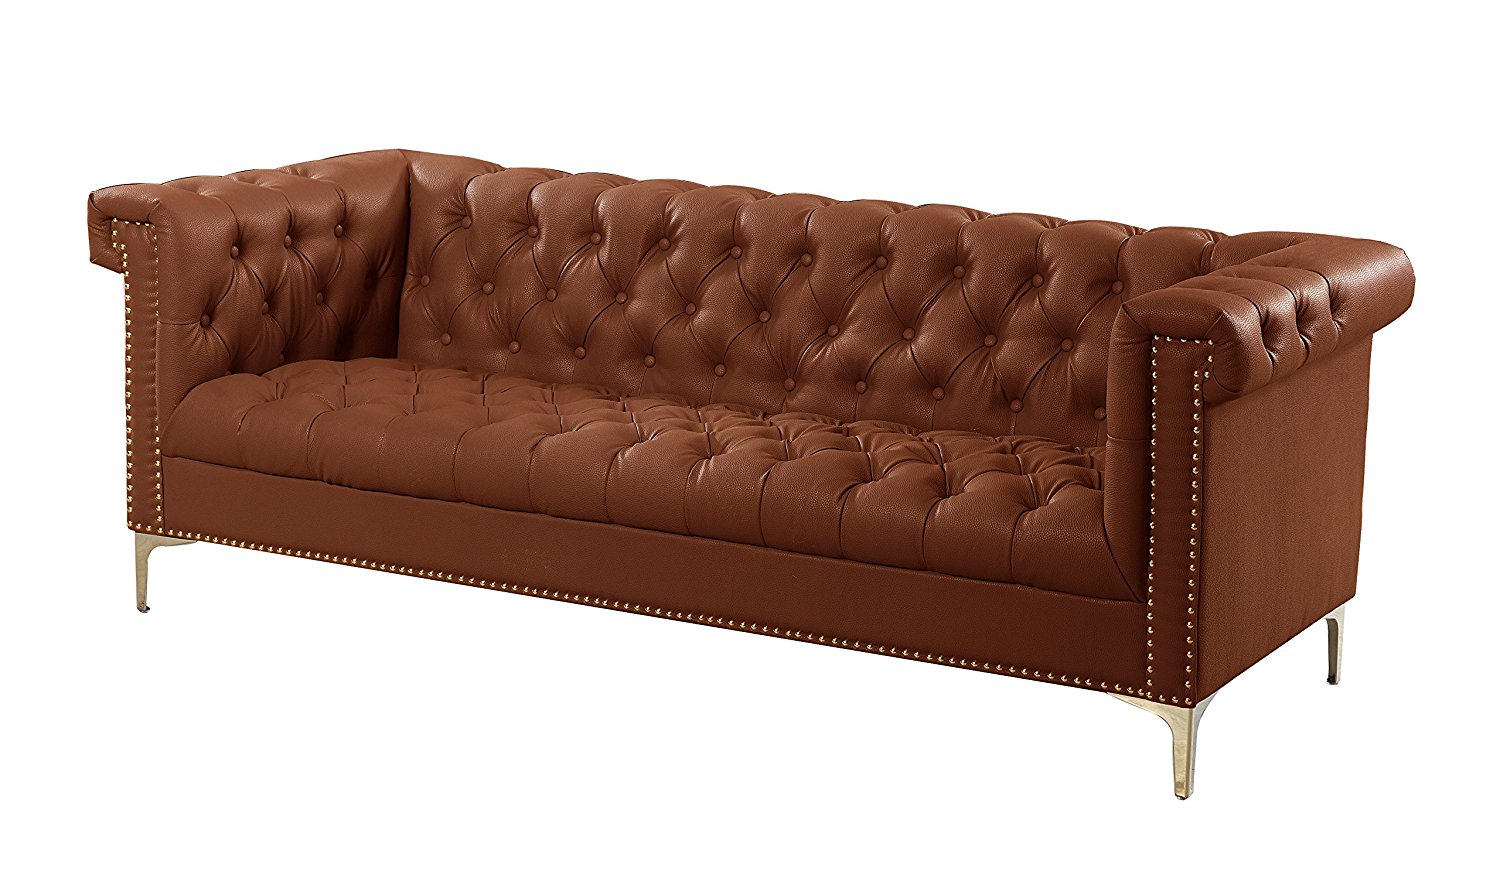 Iconic Home Winston PU Leather Modern Contemporary Button Tufted with Gold Nailhead Trim Goldtone Metal Y-leg Sofa, Brown